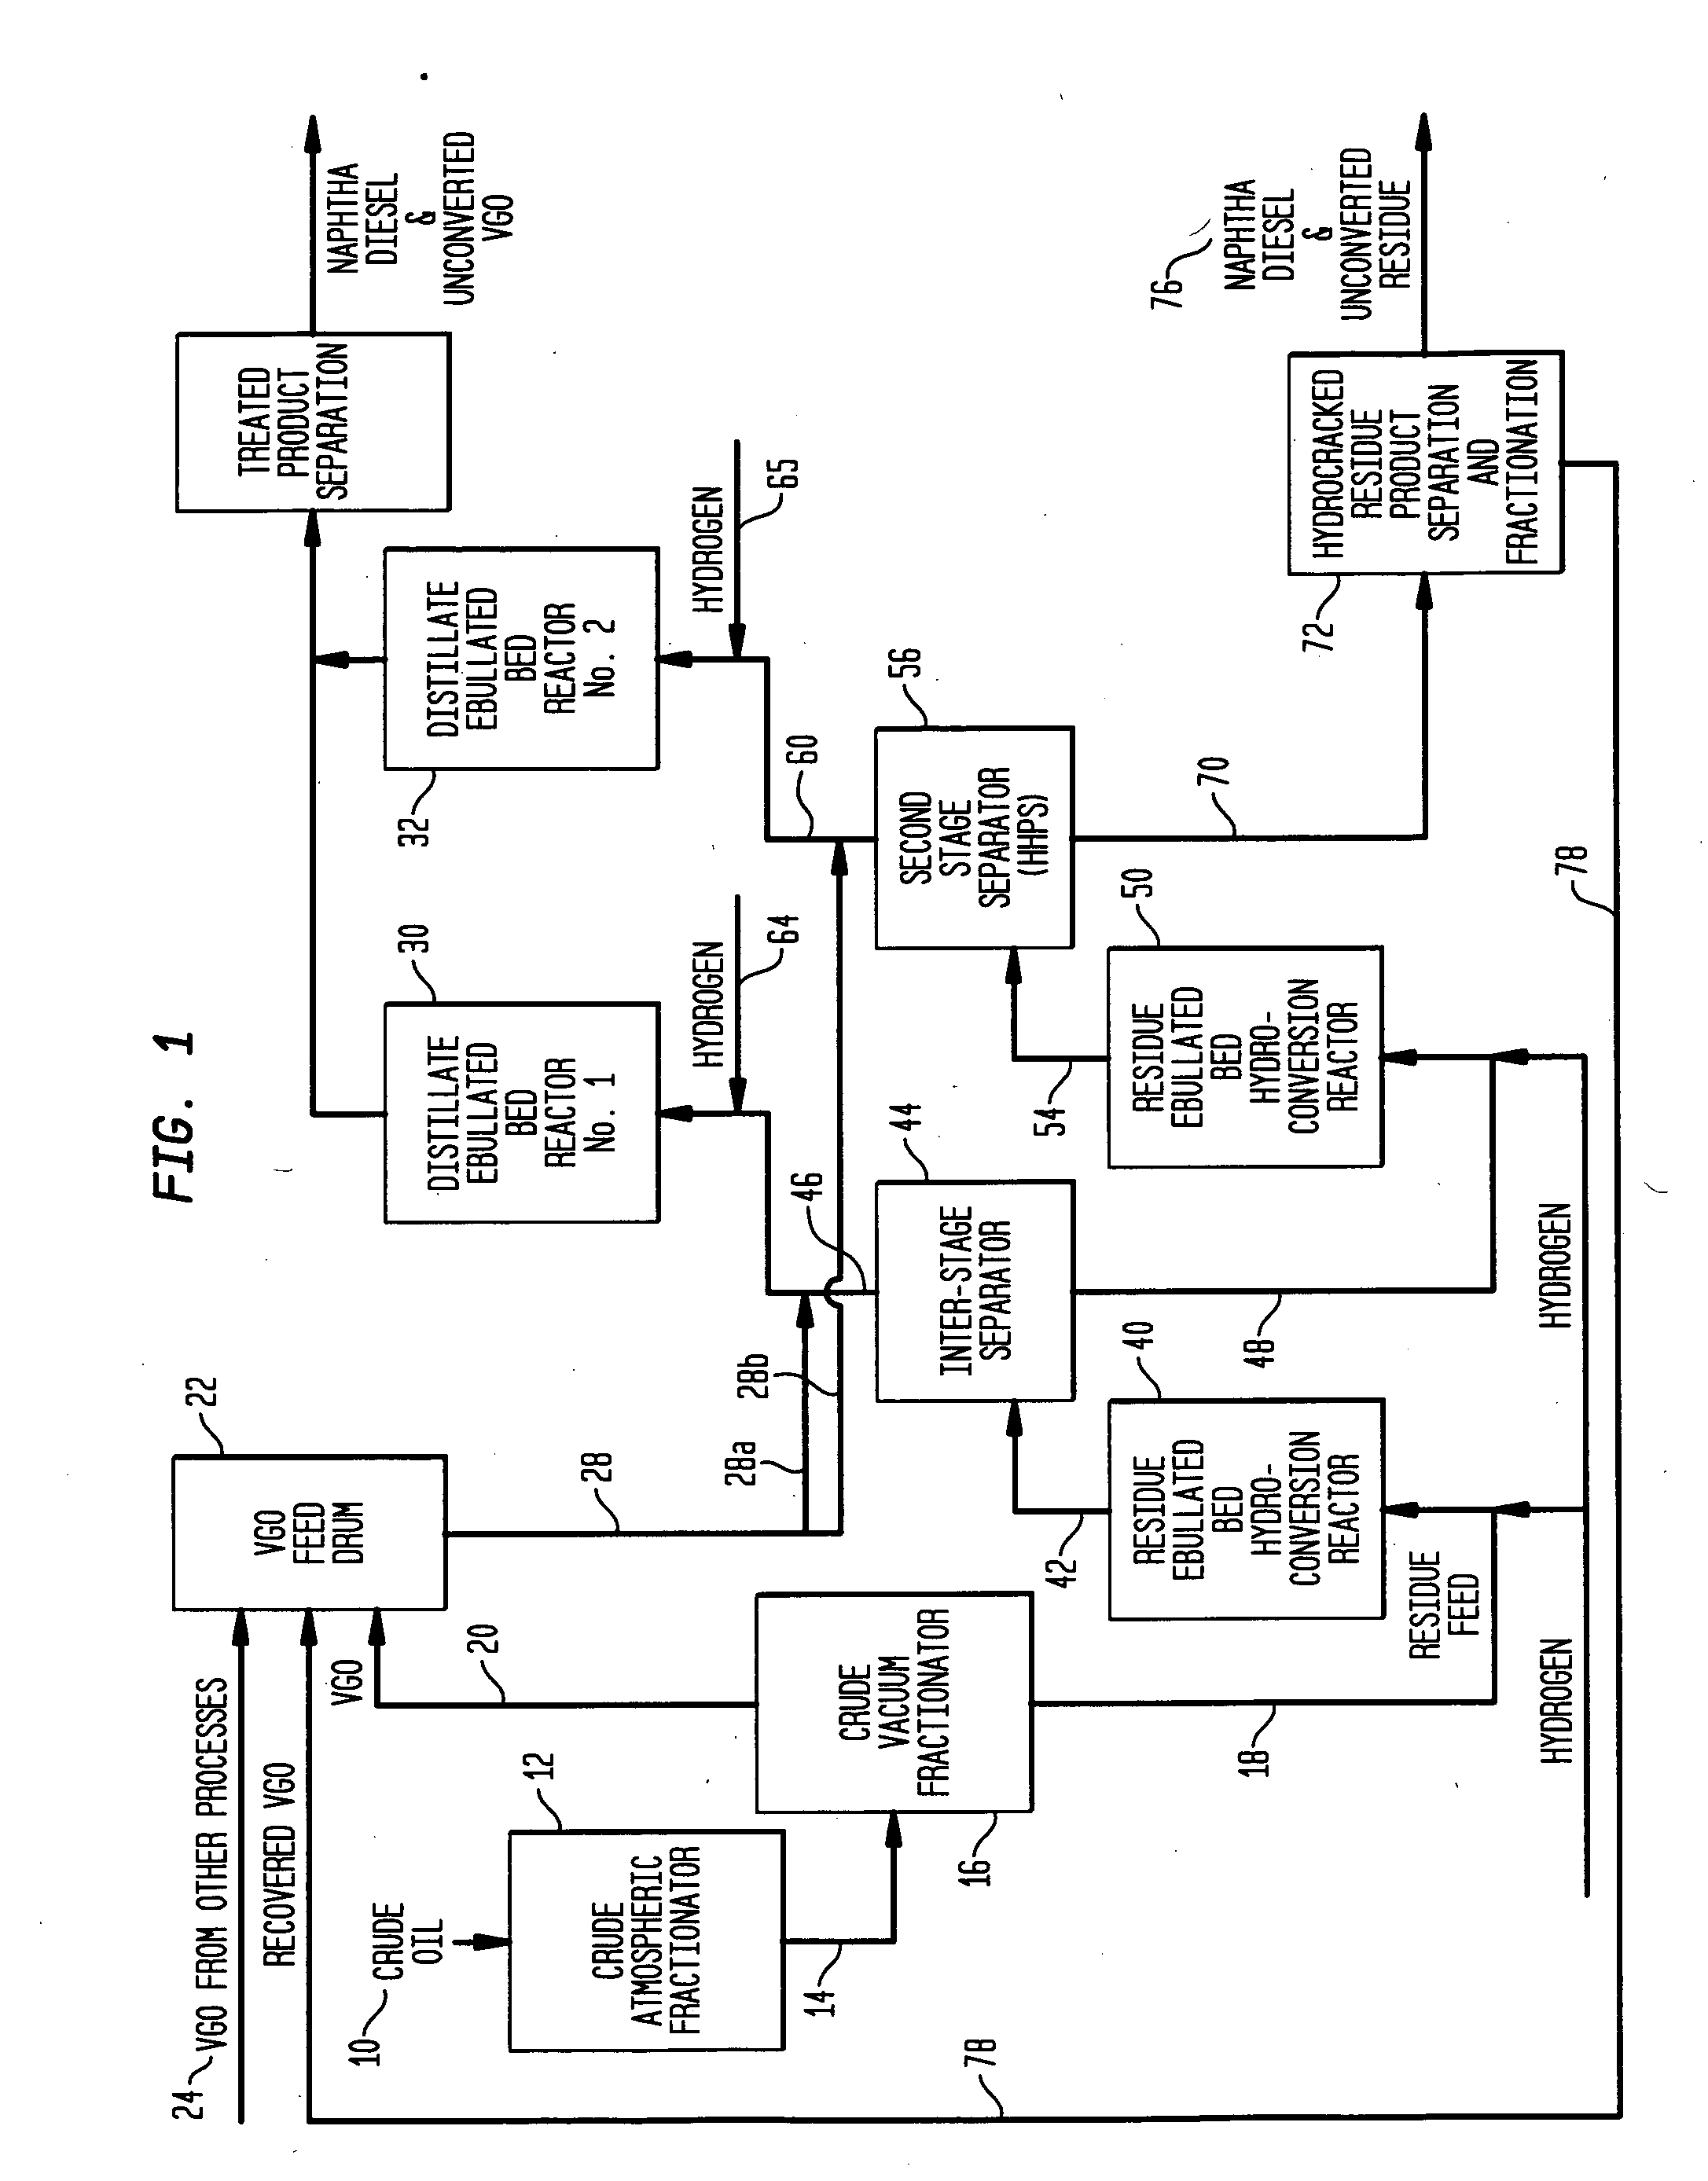 Process for multistage residue hydroconversion integrated with staight-run and conversion gasoils hydroconversion steps